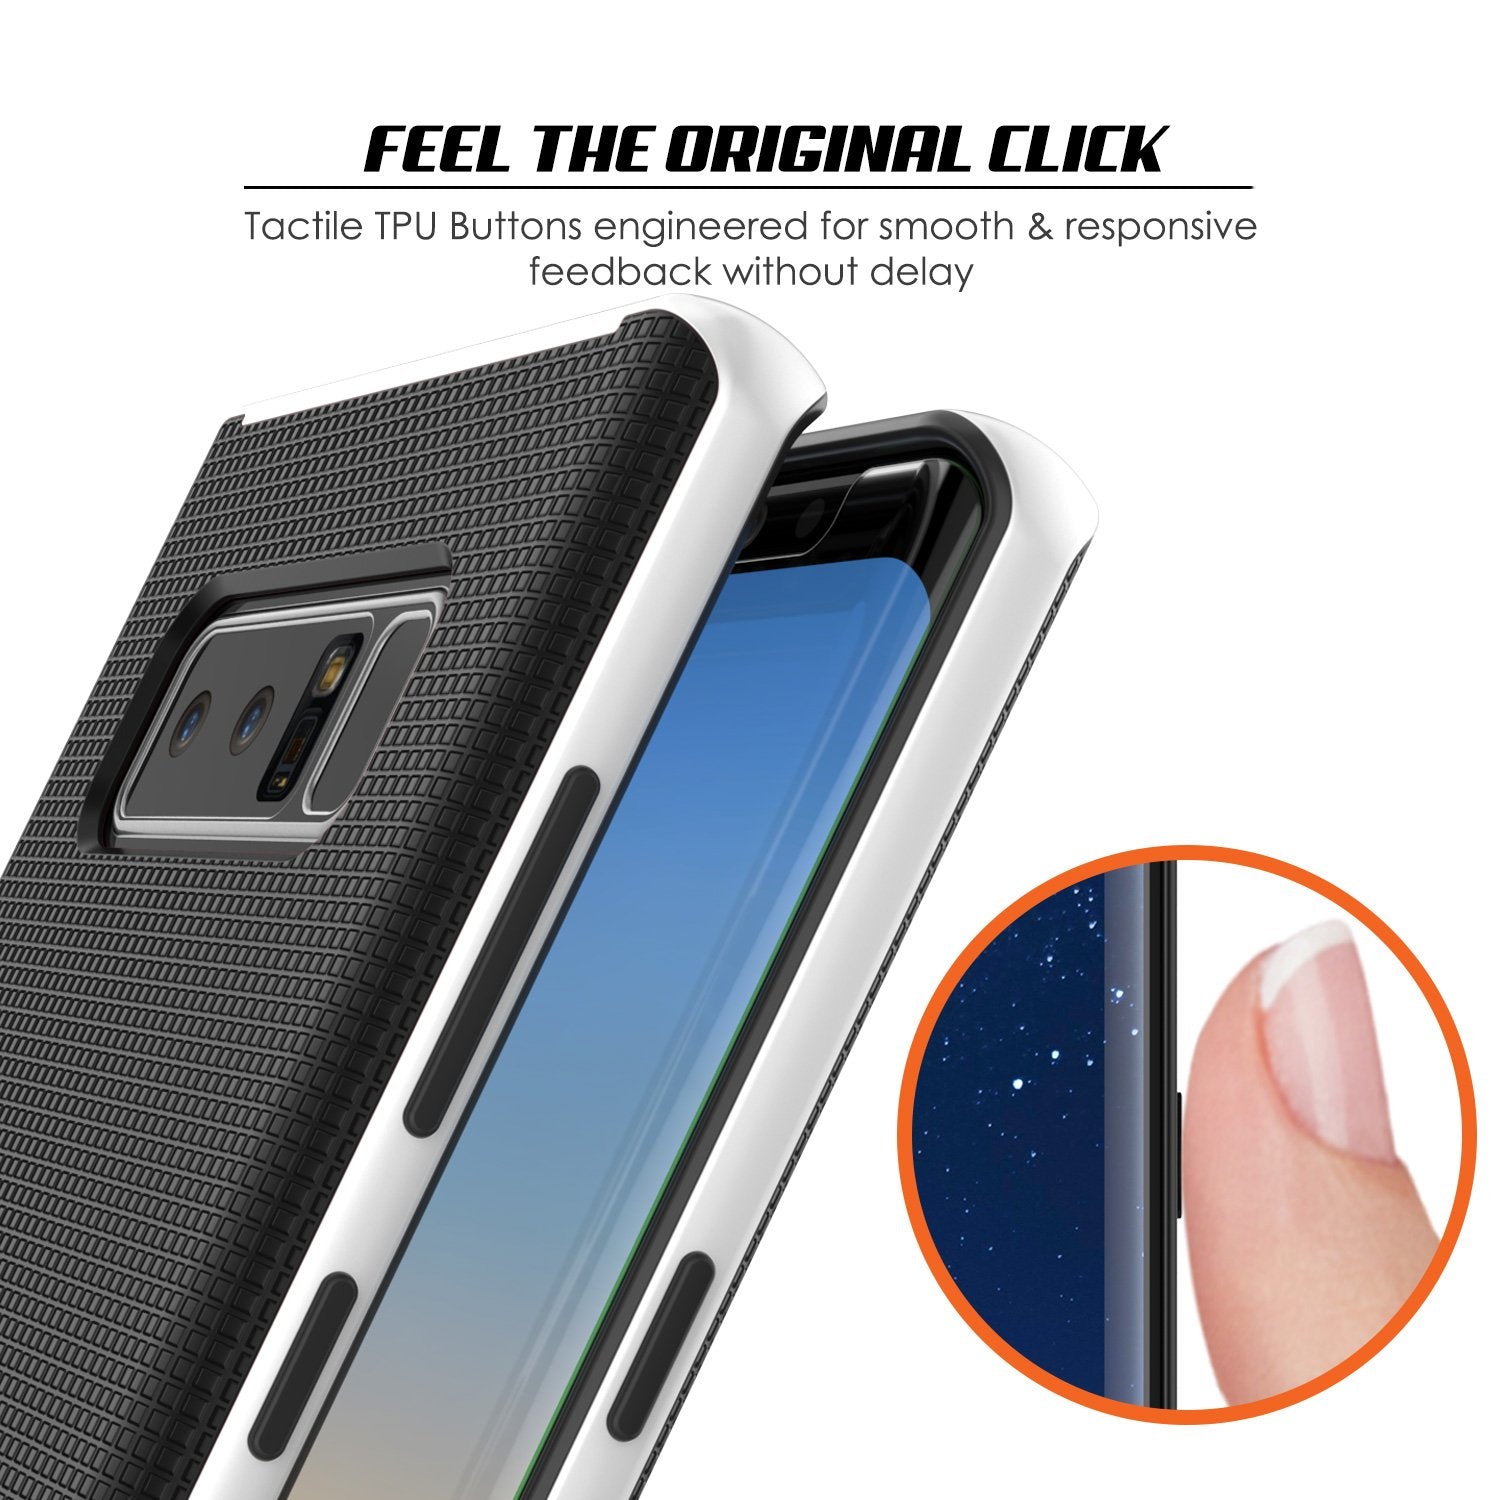 Galaxy Note 8 Case, PunkCase Stealth White Series Hybrid 3-Piece Shockproof Dual Layer Cover